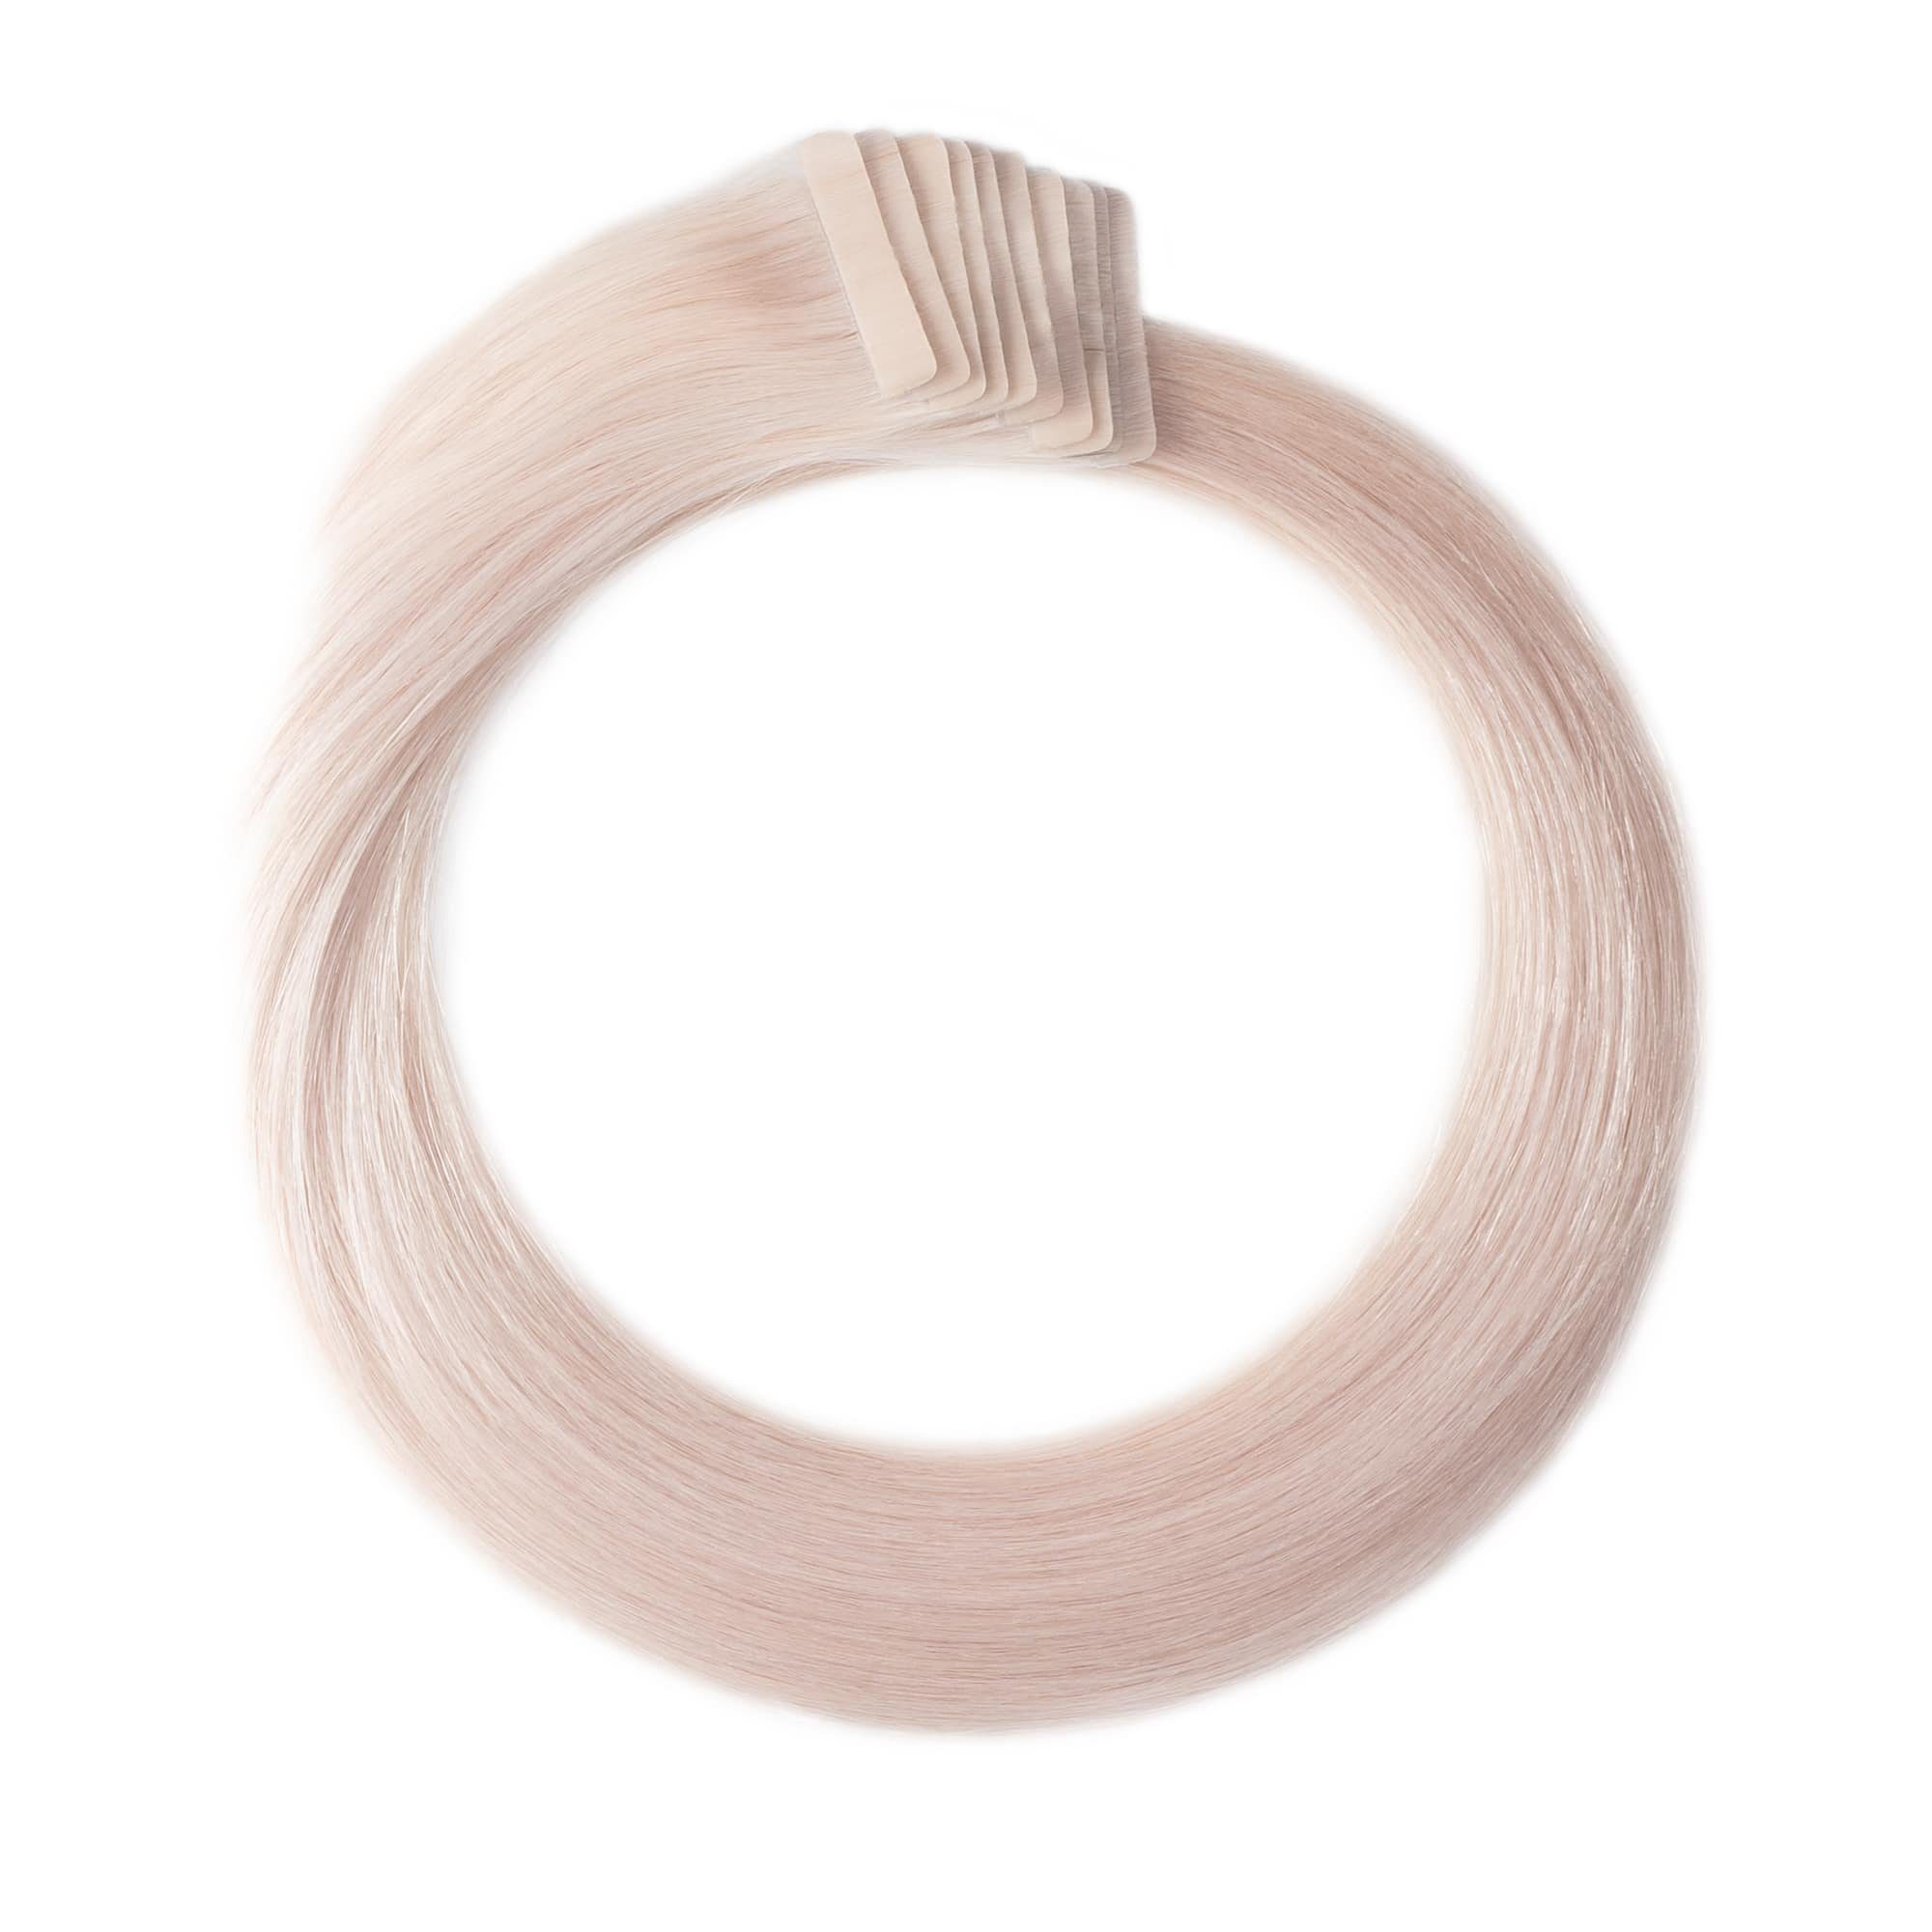 Global Extend Echthaar-Extension Tape-Extensions #SW silver-white